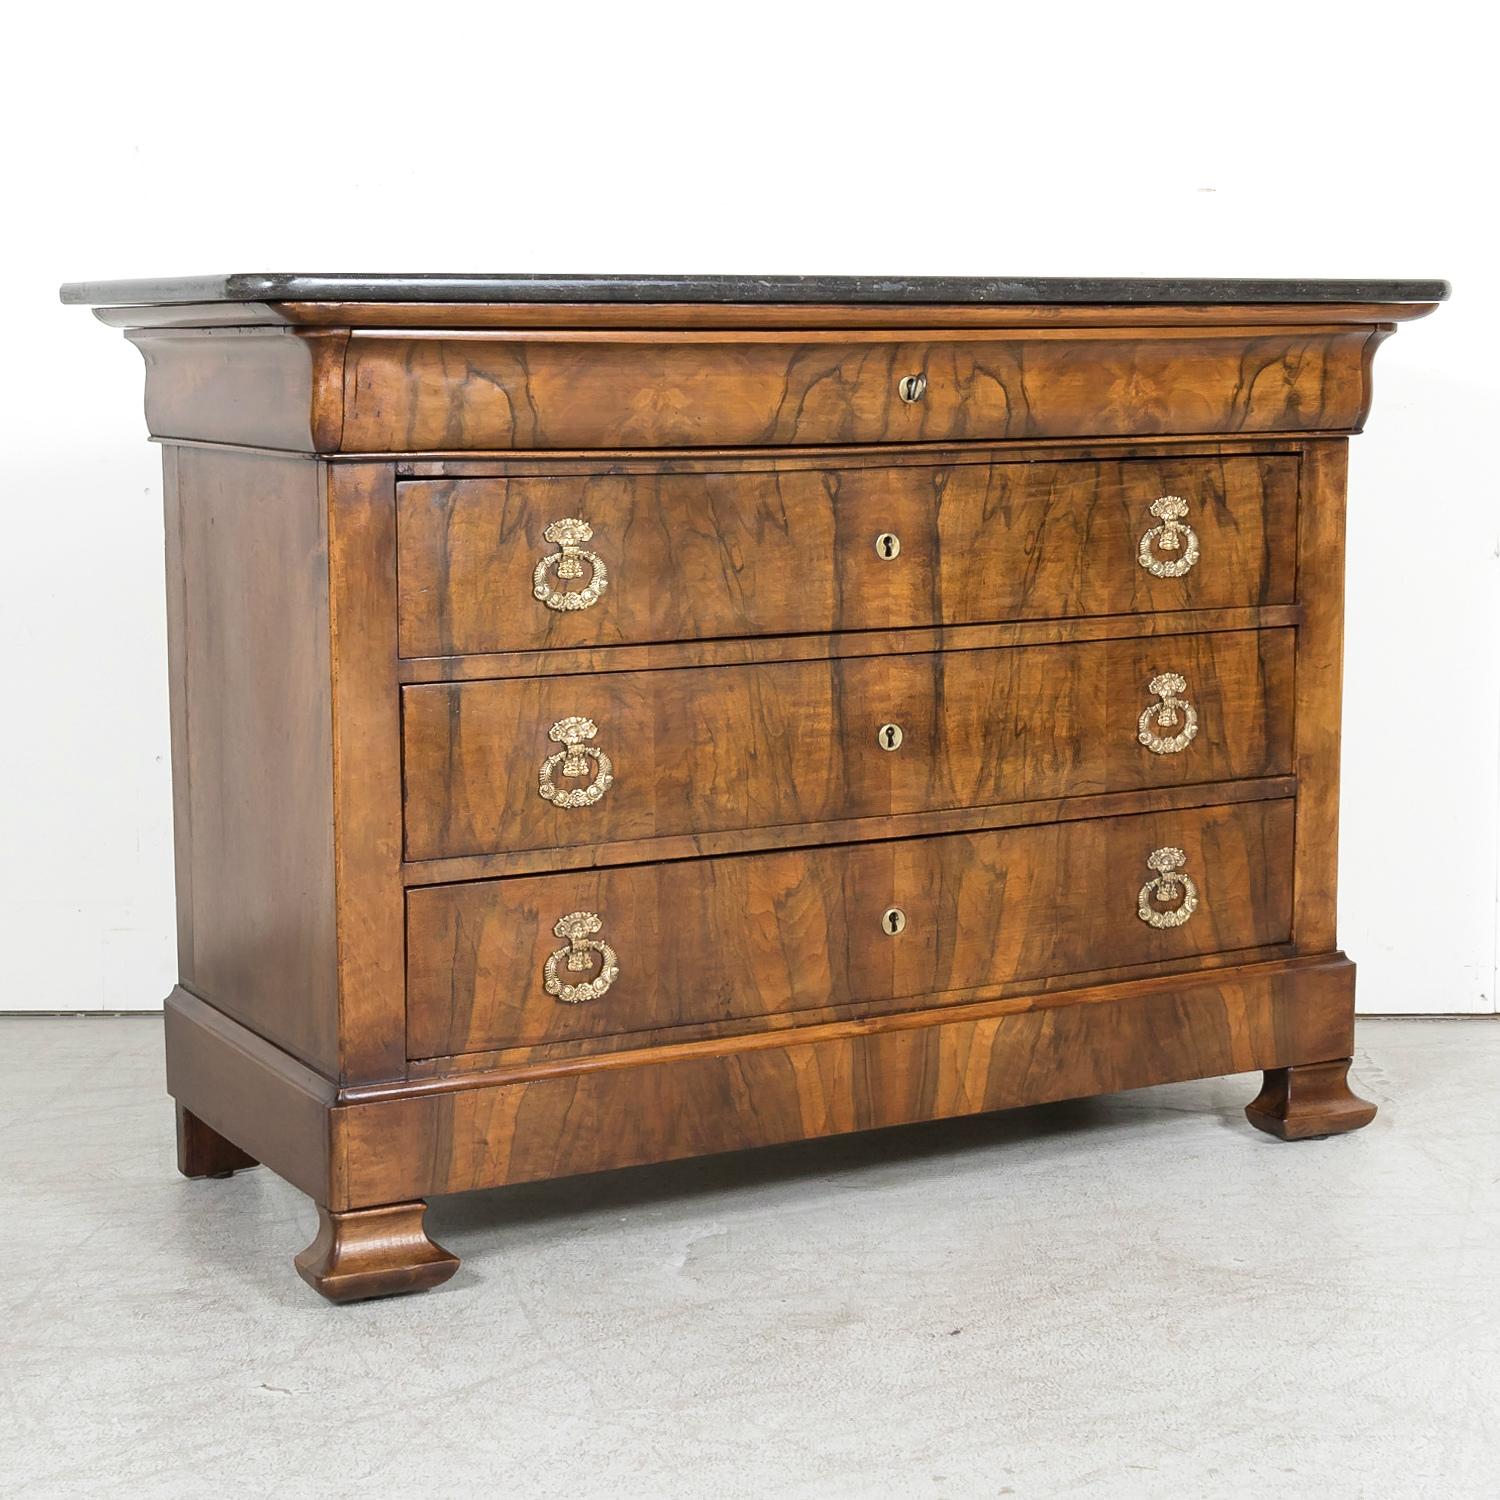 A 19th century French Louis Philippe period four-drawer commode handcrafted by talented artisans in Lyon of walnut and burled walnut, circa 1830s. Having the original black fossil marble top, this handsome antique French chest of drawers features a